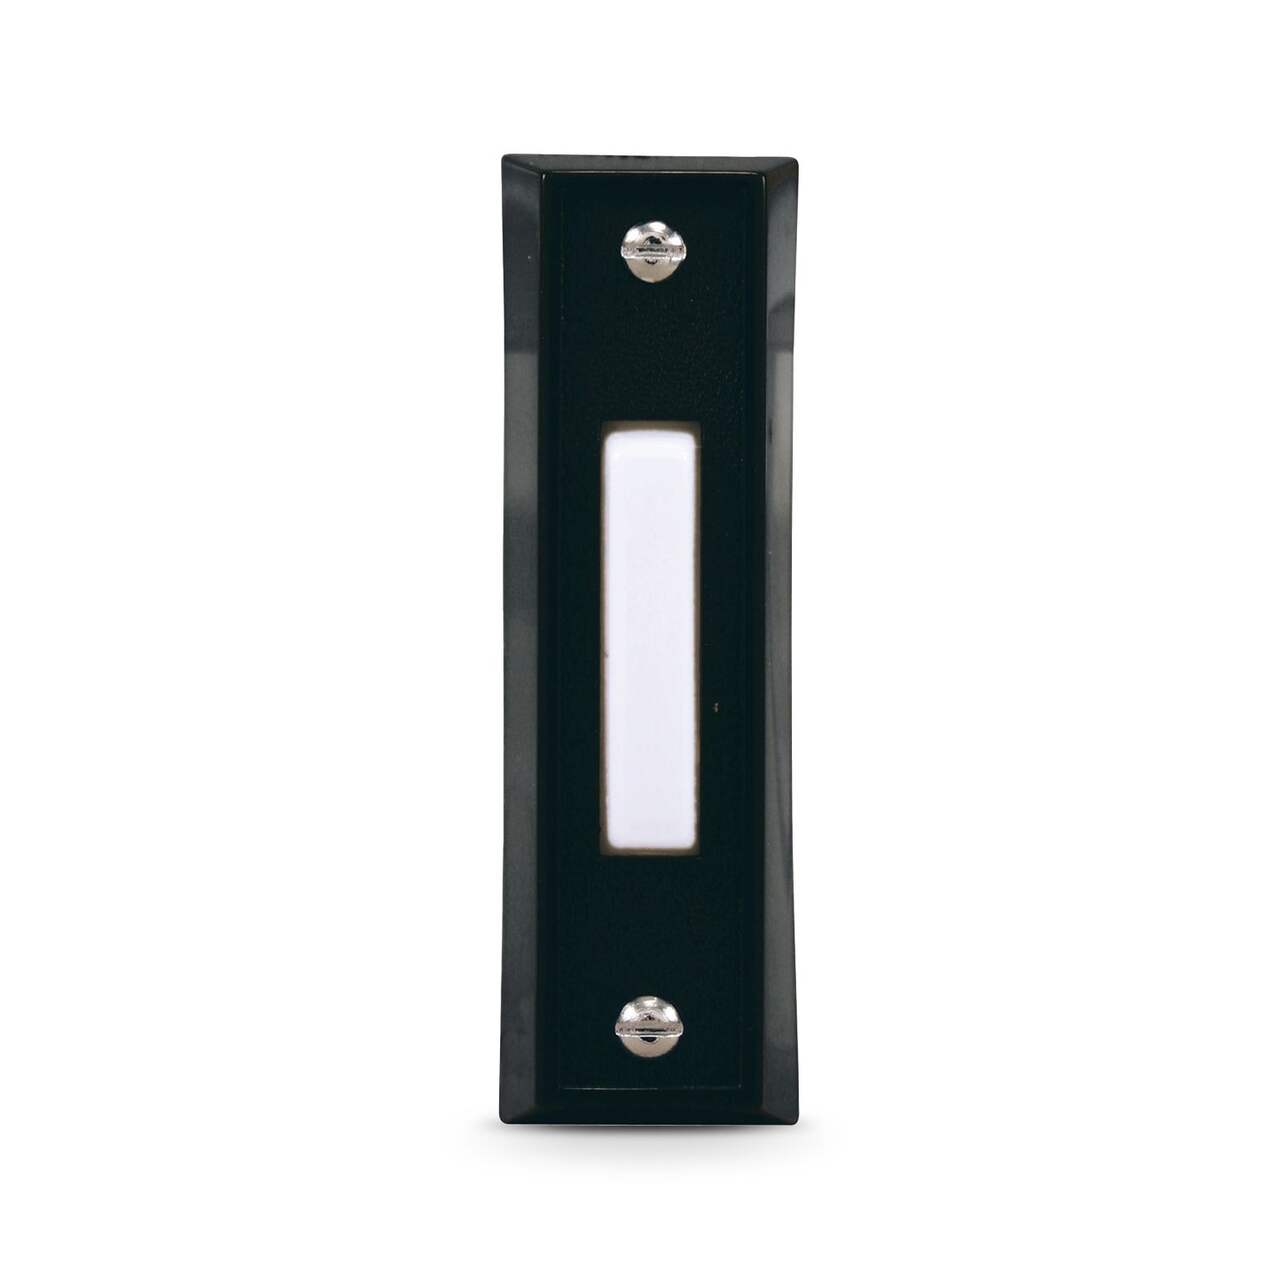 Globe Wired Unlighted Push Doorbell Chime Button, Black